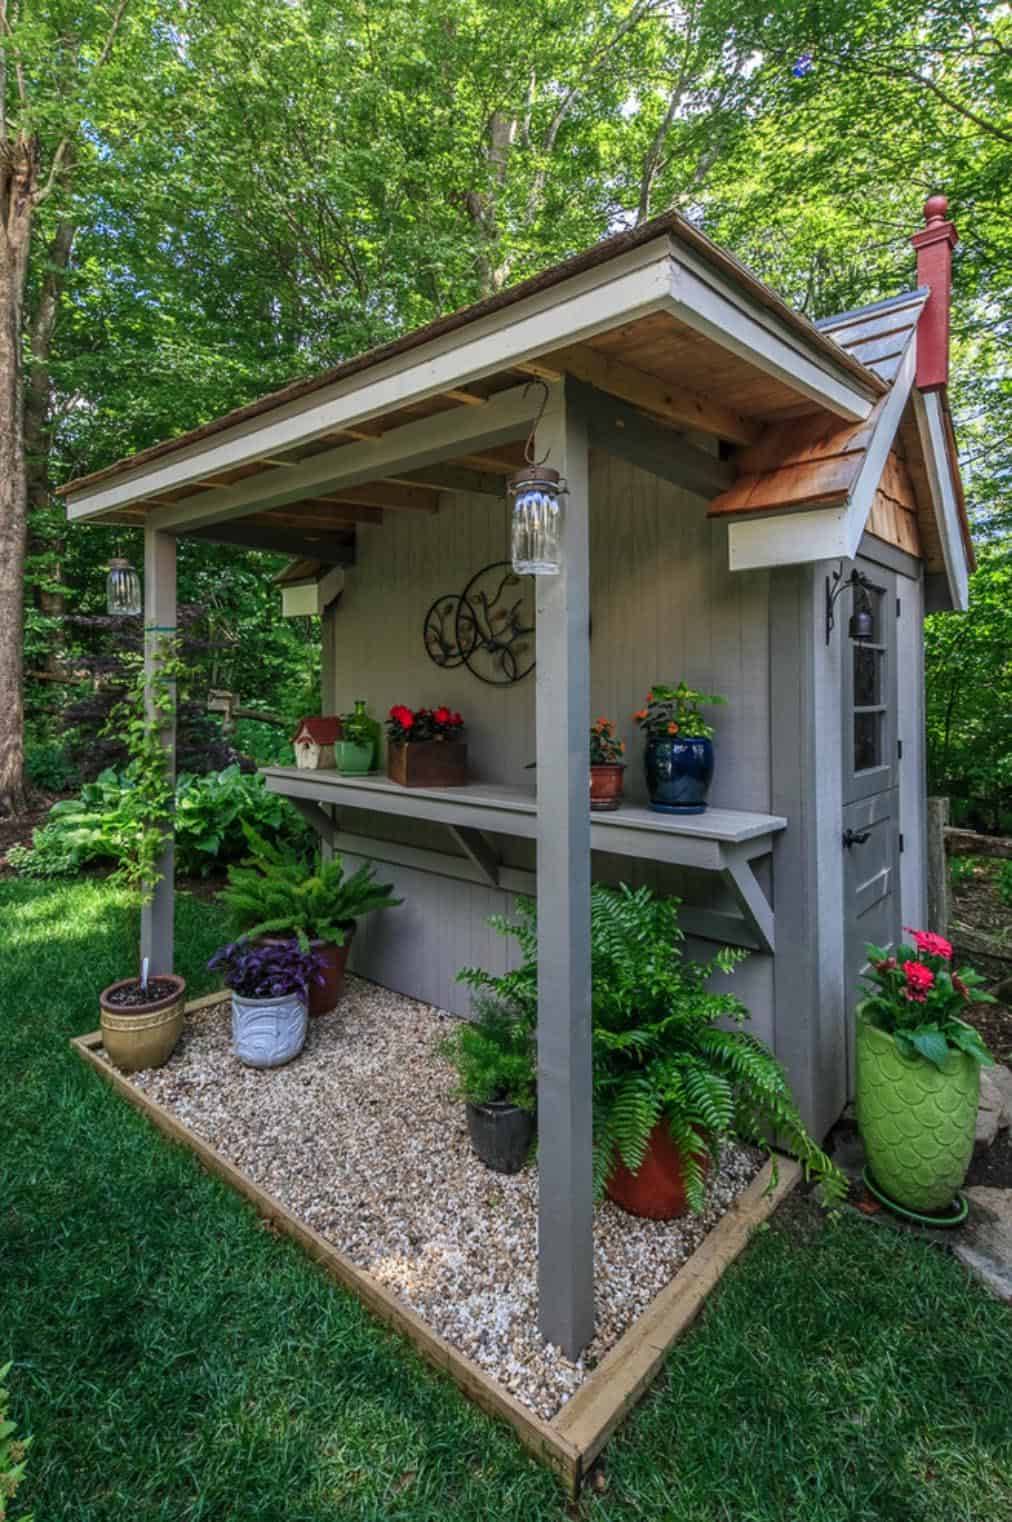 Simply Amazing Garden Shed Ideas Shed Landscaping Shed Decor